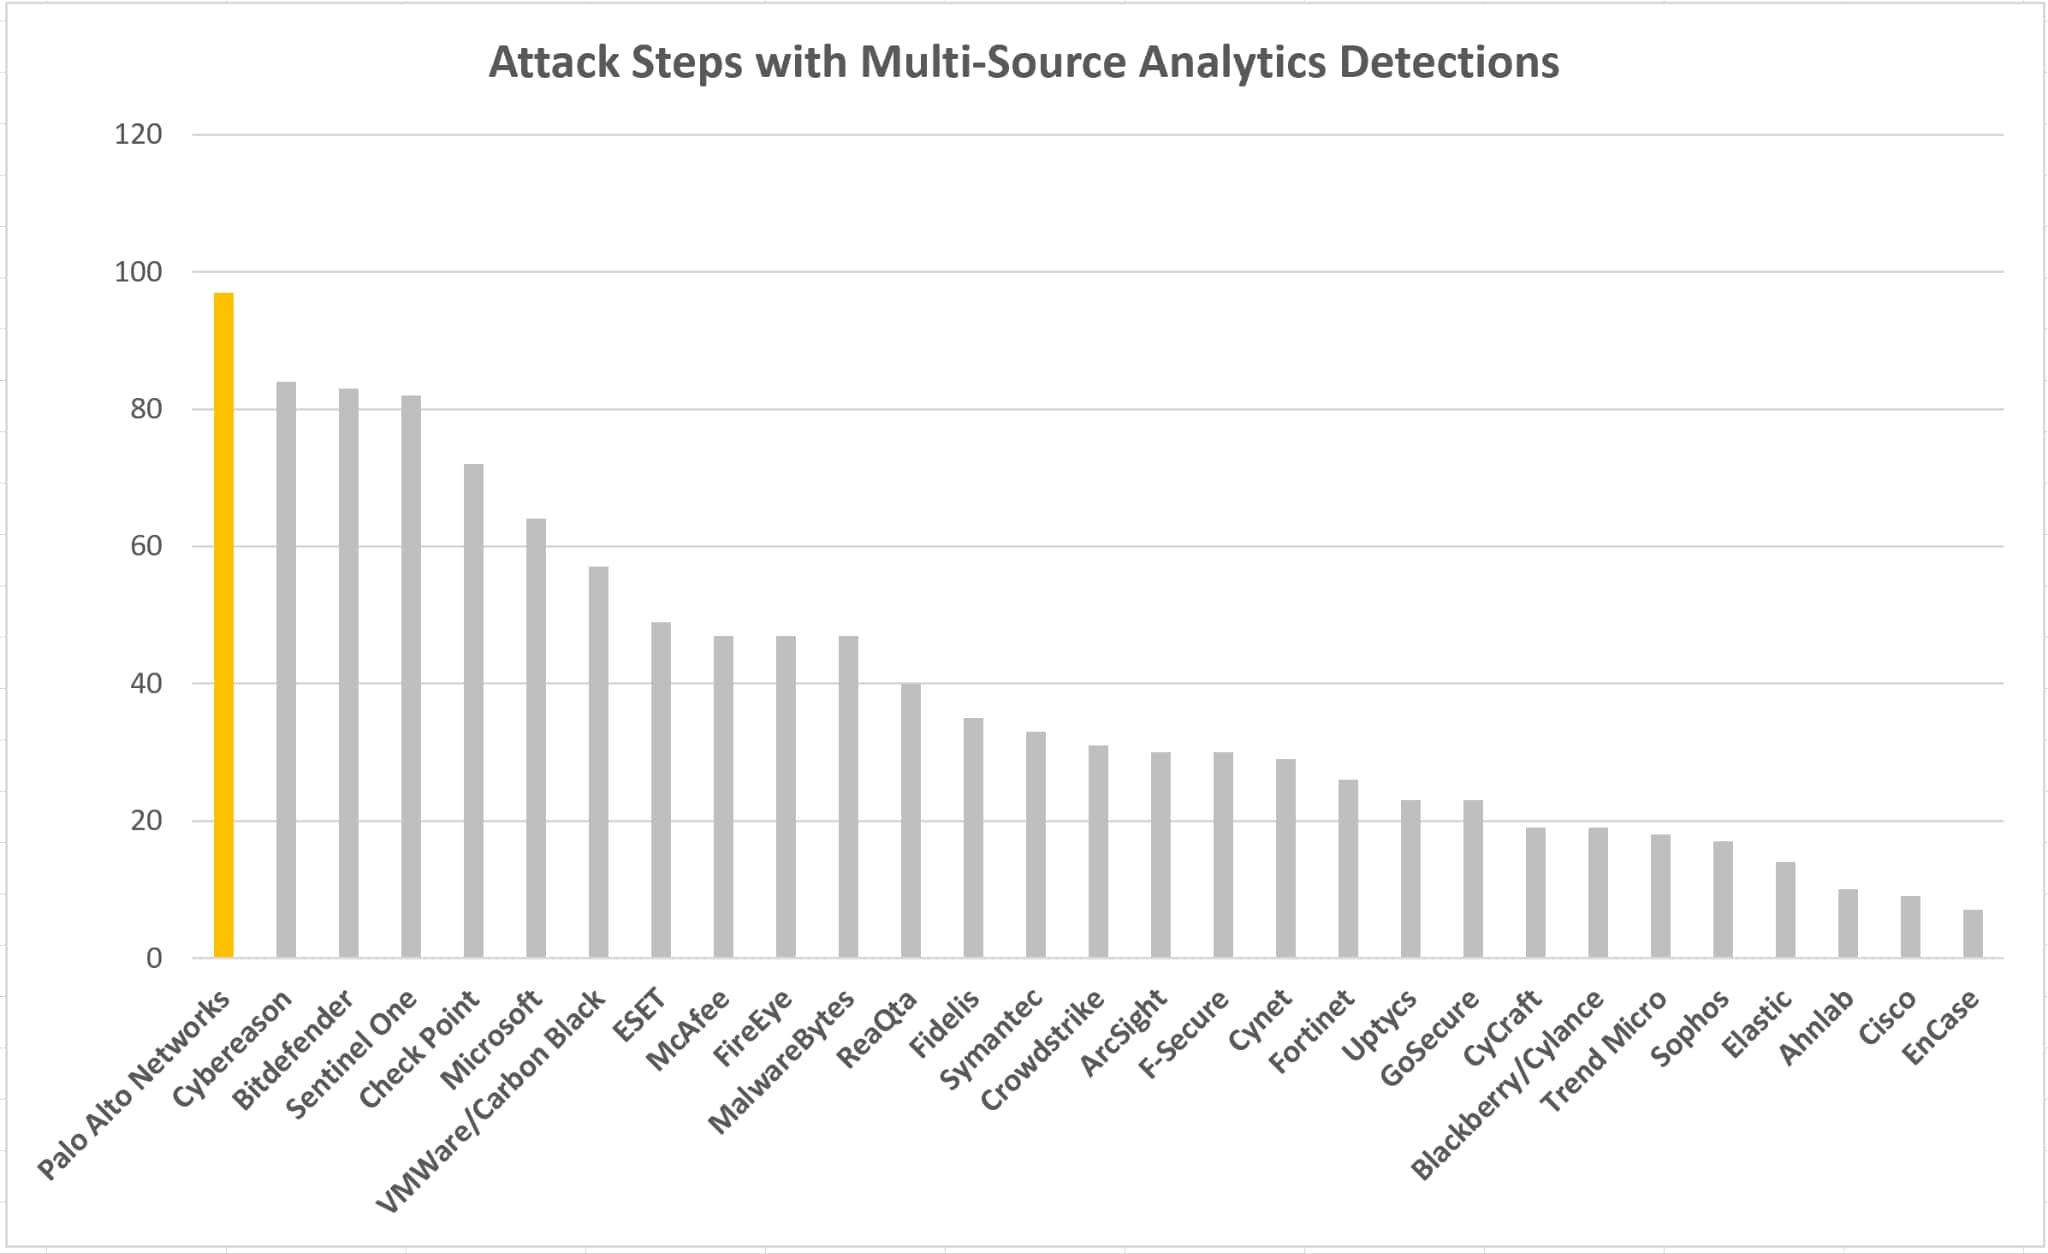 Bar chart showing attack steps with multi-source analytics detections 